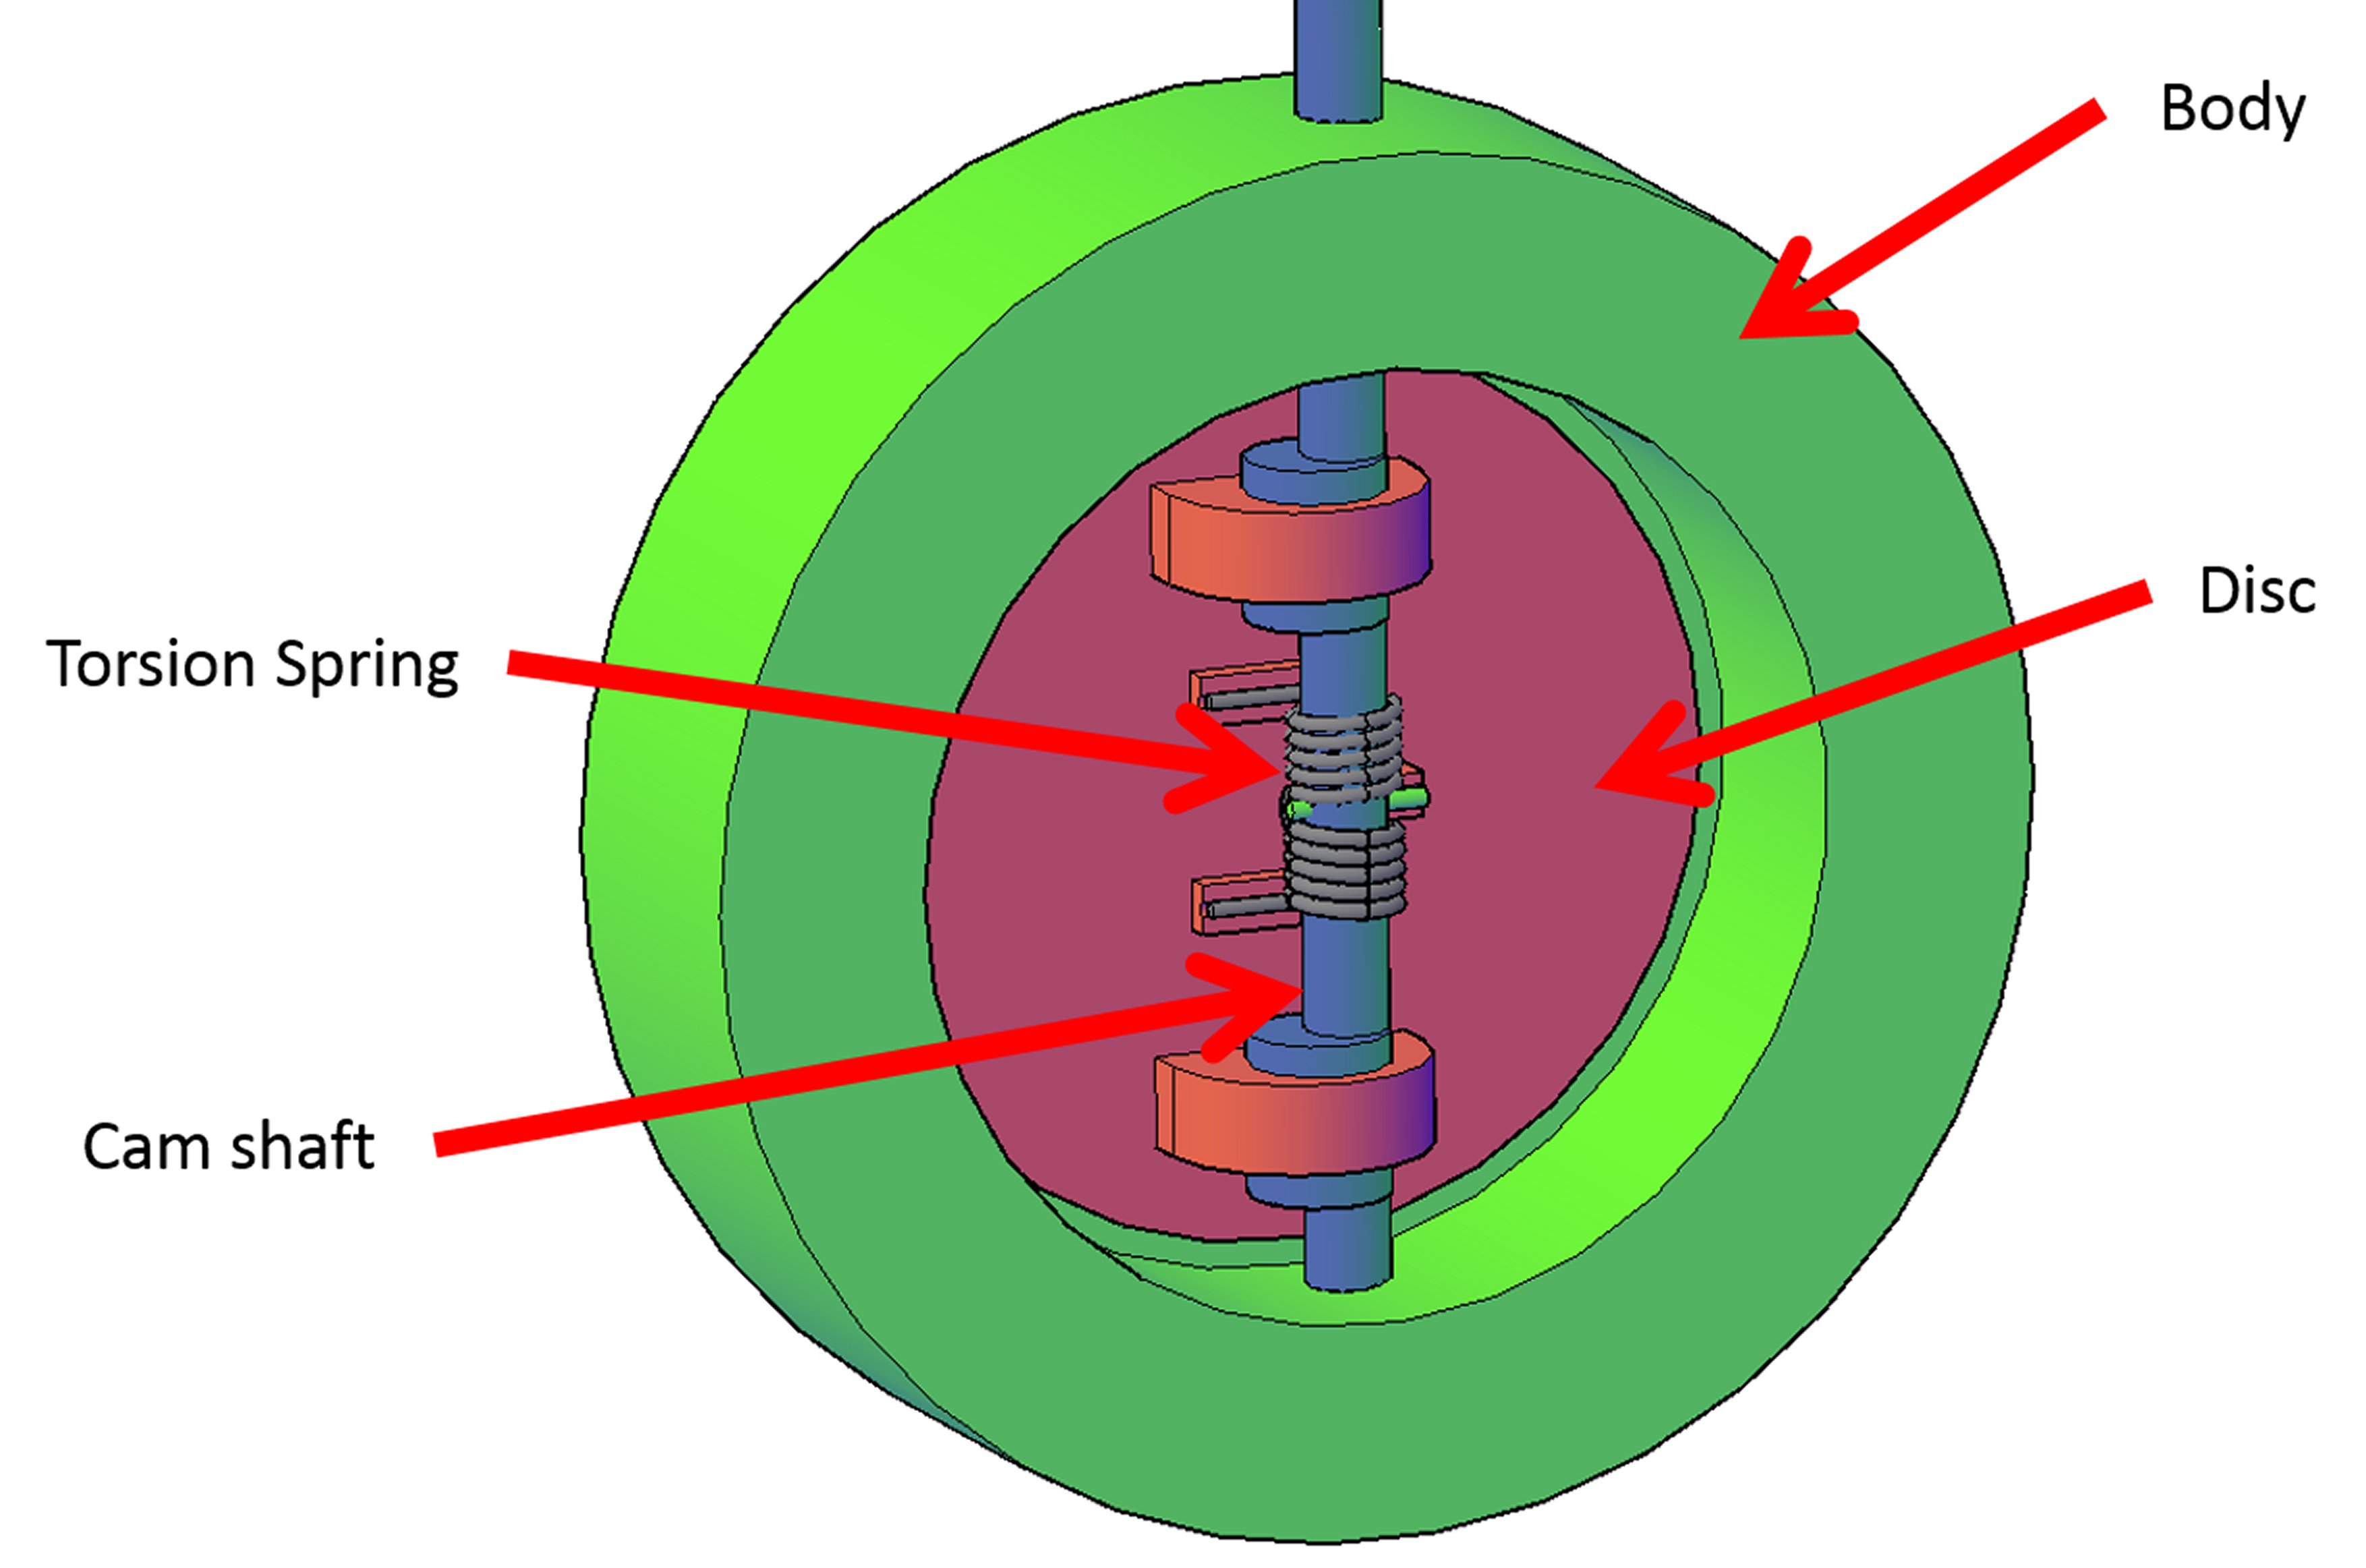 Conceptual Illustration of the Cryogenic Butterfly Valve
